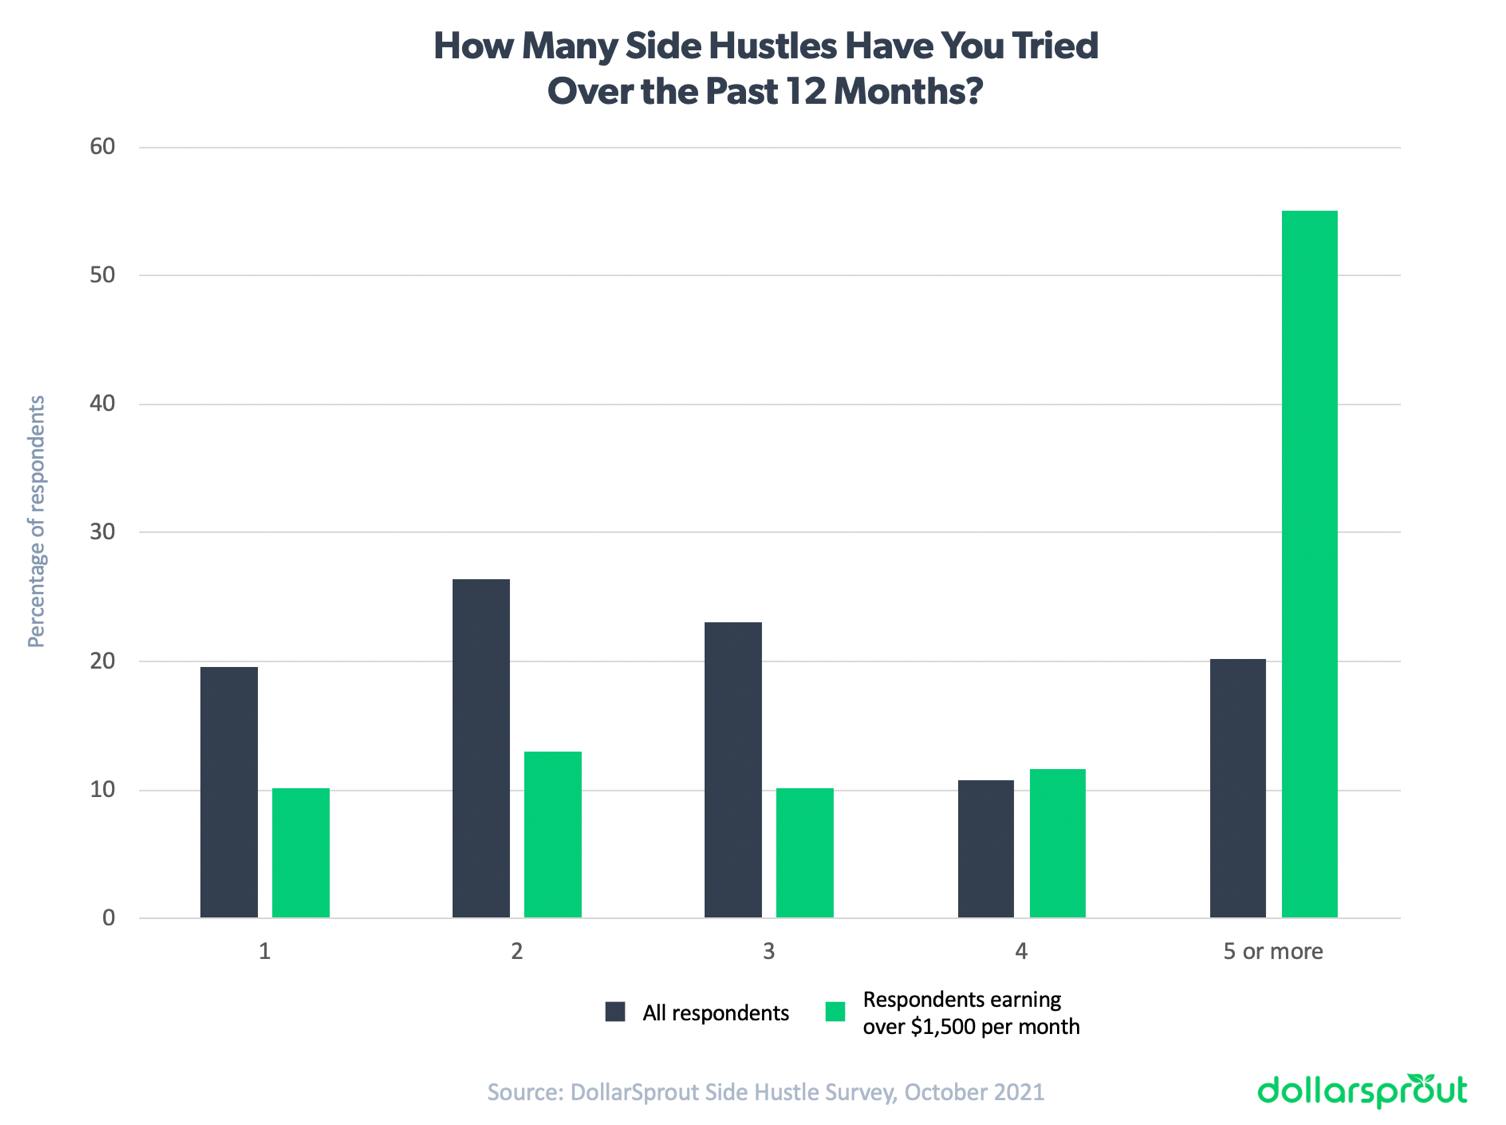 Chart showing that the highest earning side hustlers are those who are willing to try new things. Over half of side hustlers earning over $1,500 per month have tried 5 or more side hustles in the past 12 months.